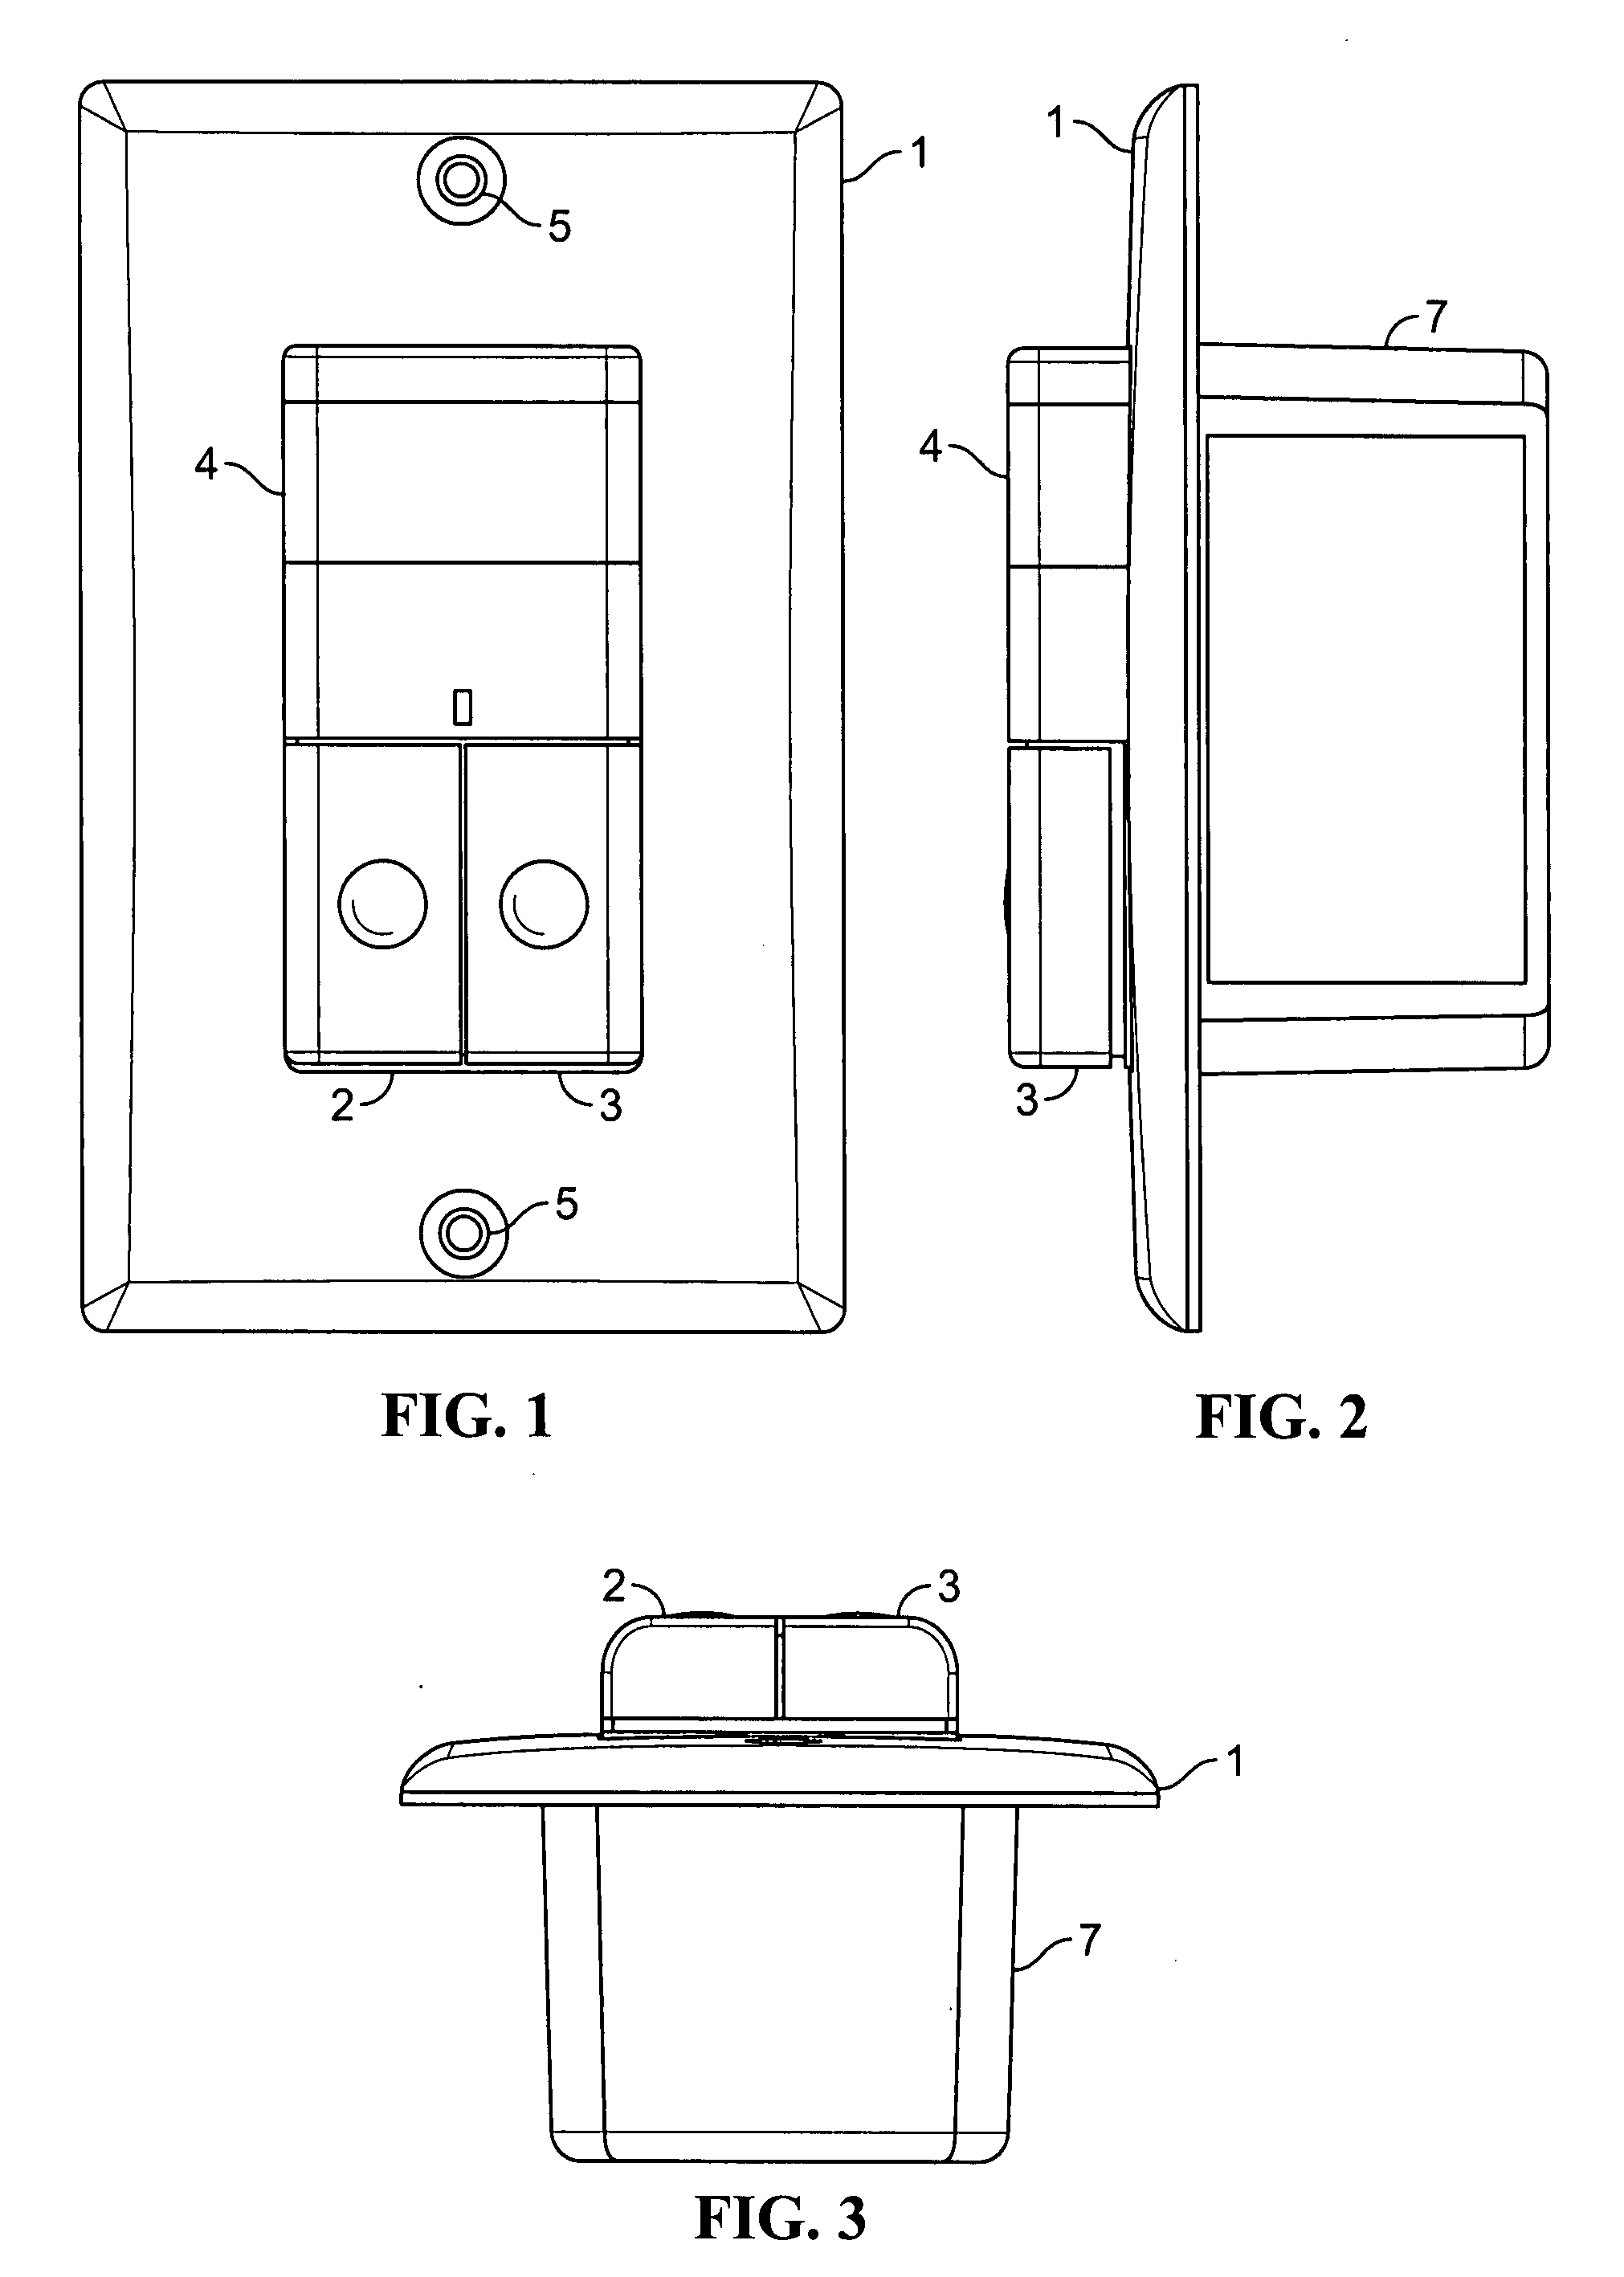 Wall switch for lighting load management system for lighting systems having multiple power circuits